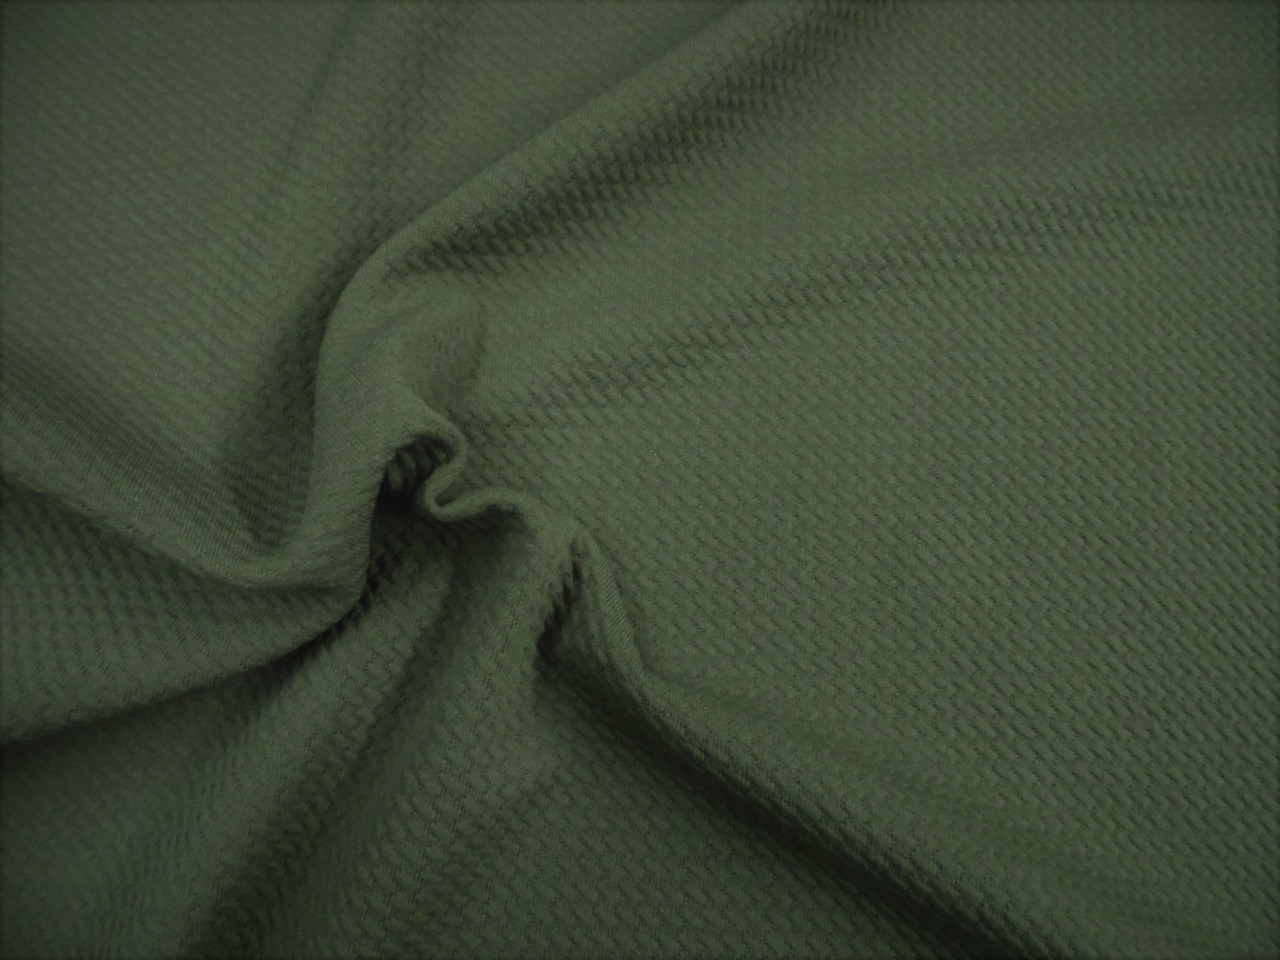 Bullet Textured Liverpool Fabric 4 way Stretch Olive Drab T36